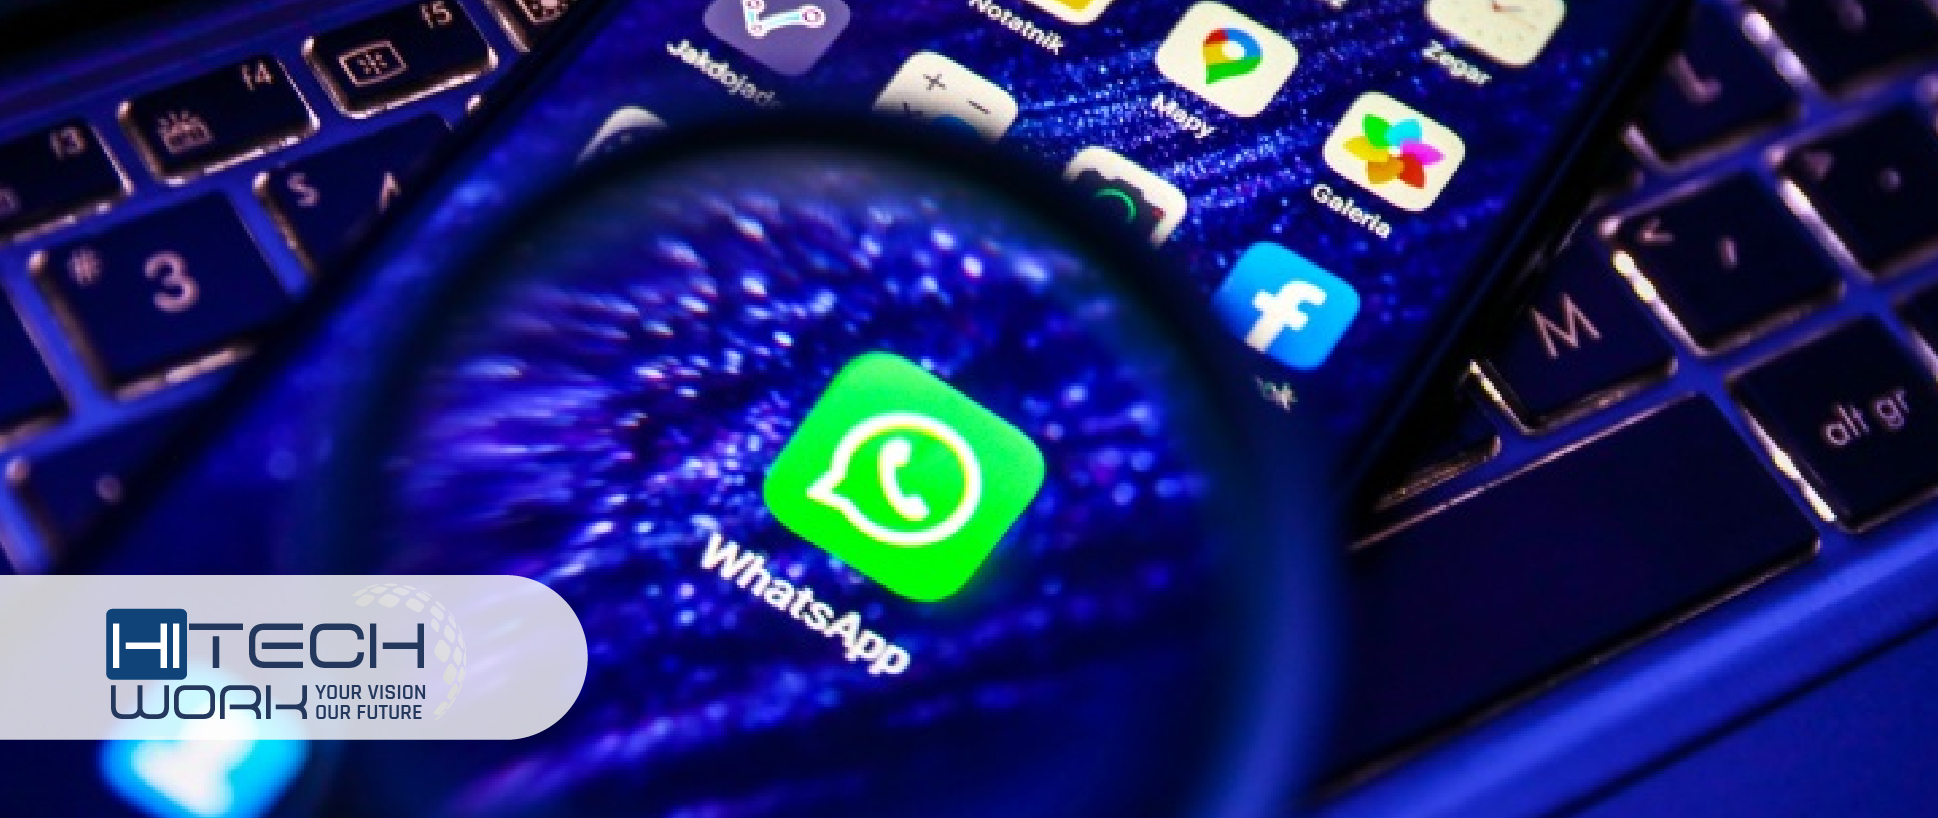 Users Can Use WhatsApp on More Than One Phone